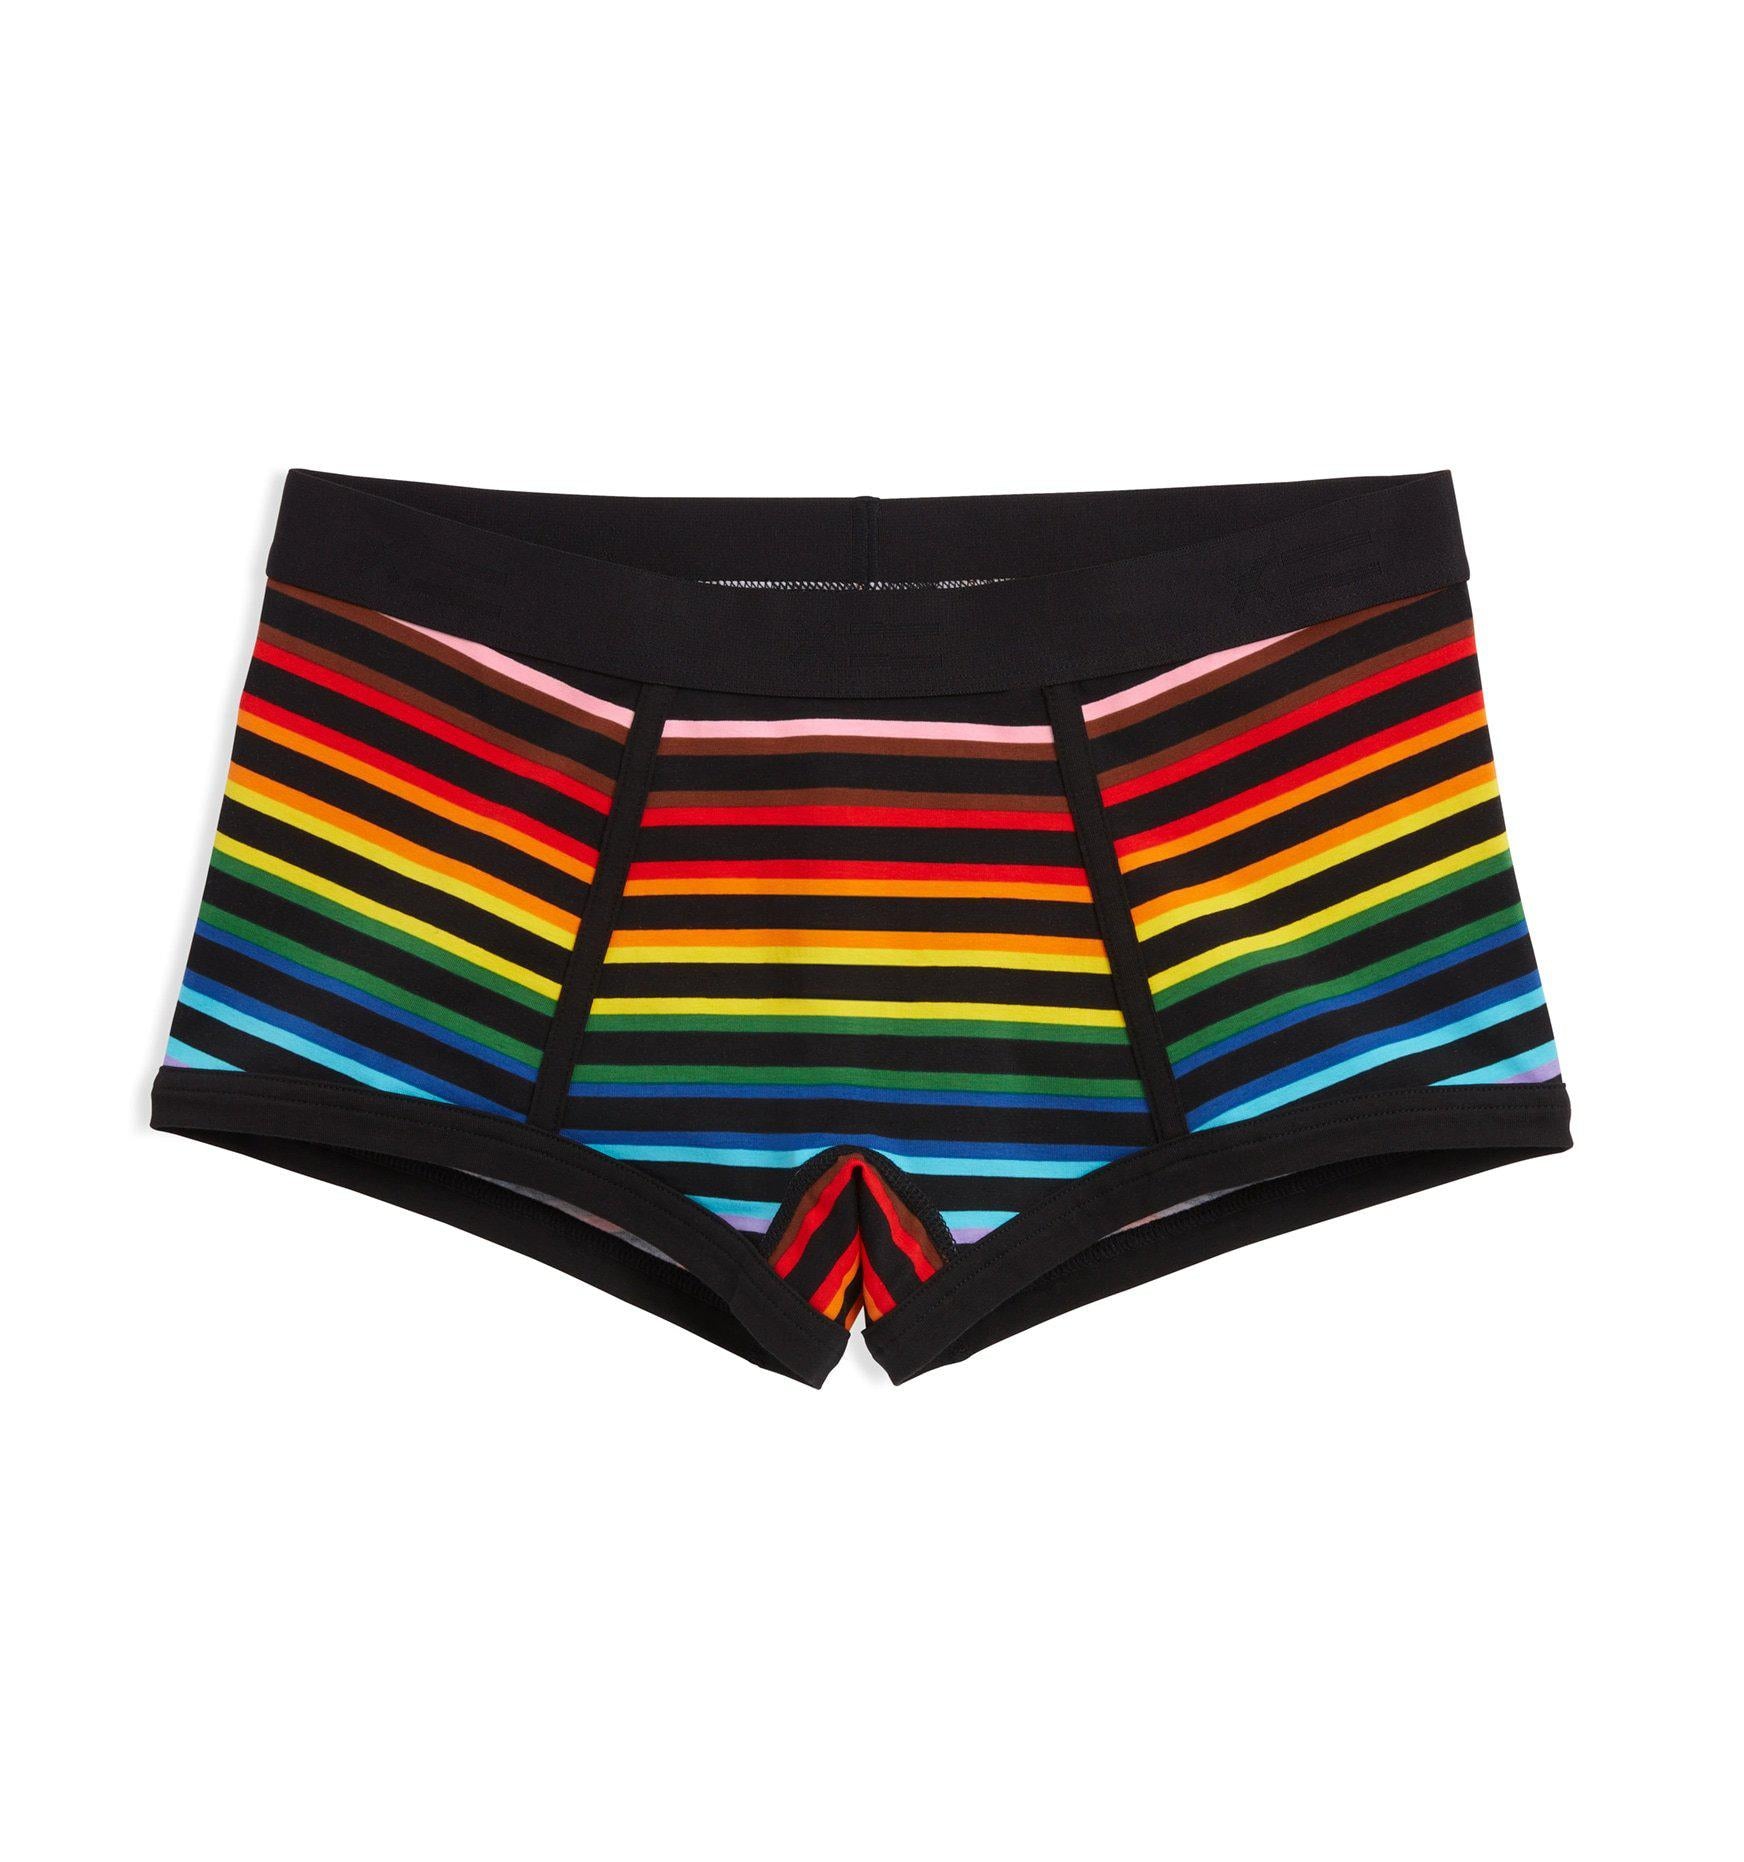 TomboyX 4.5 Trunks, Micromodal Boxer Briefs Underwear, All Day Comfort  -X-Small/Black Rainbow at  Women's Clothing store